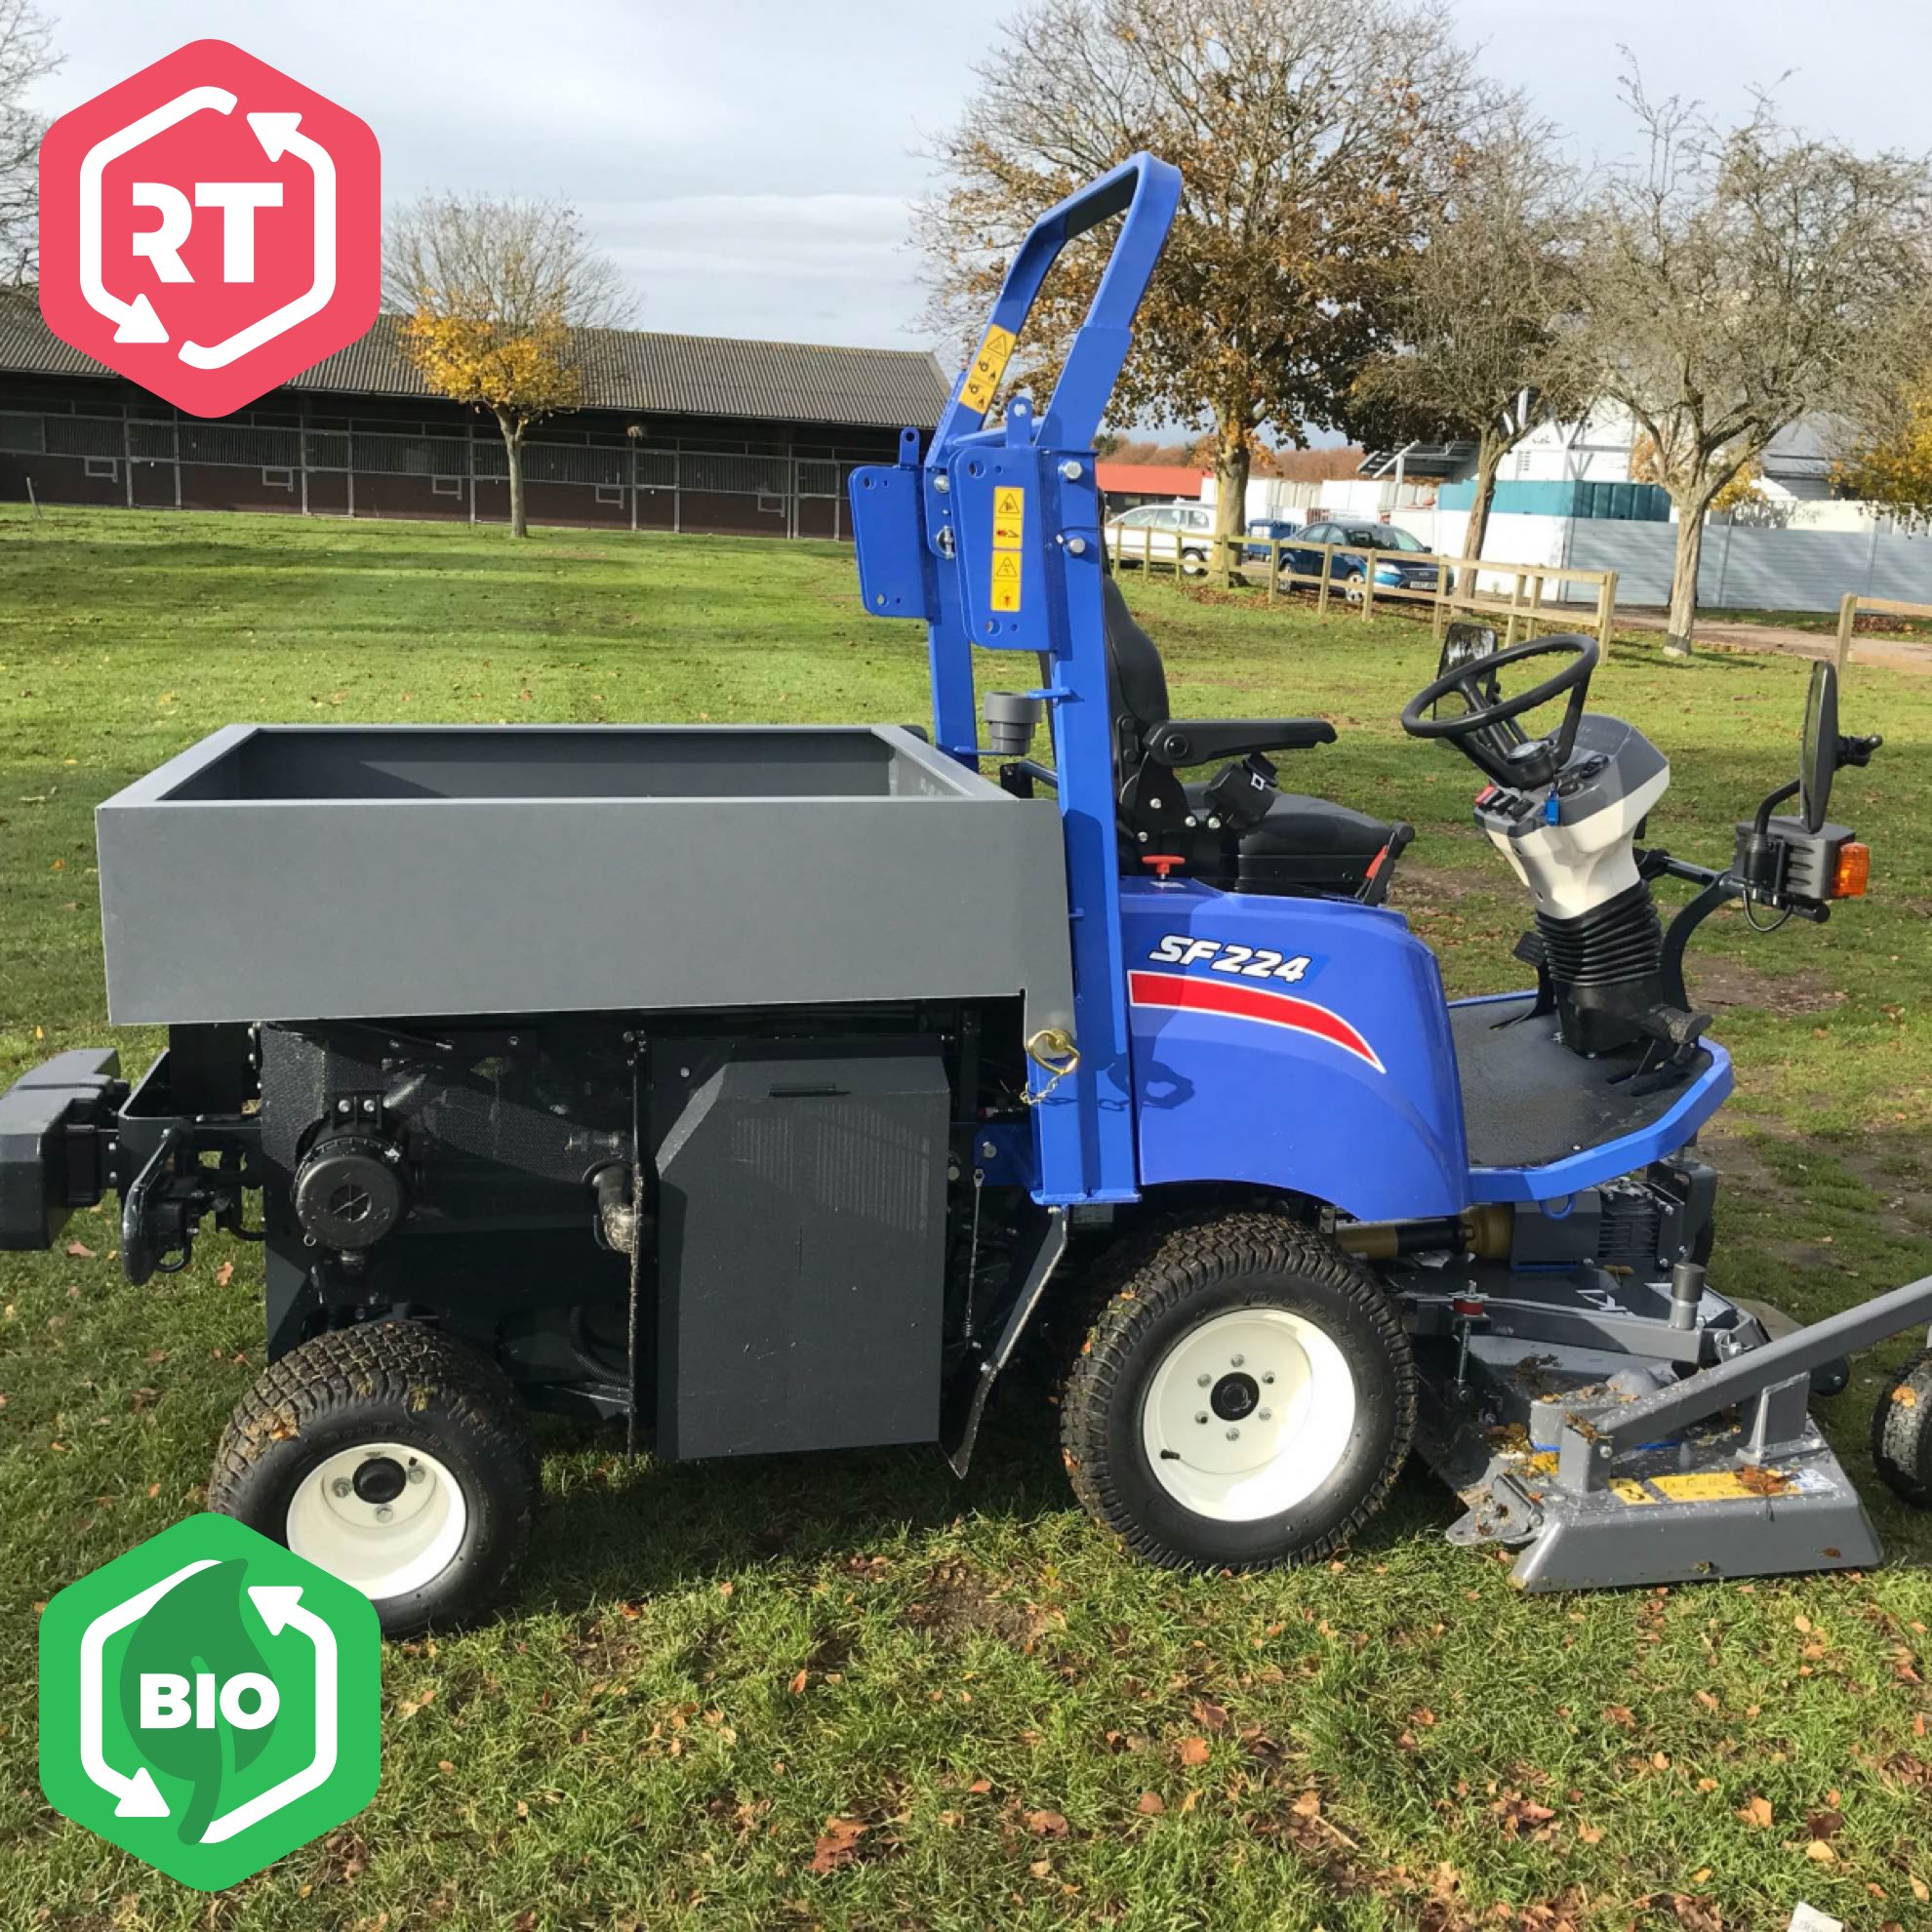 Used Iseki SF224 Ride-on, Out-front Mower with Utility Cargo Tool Box